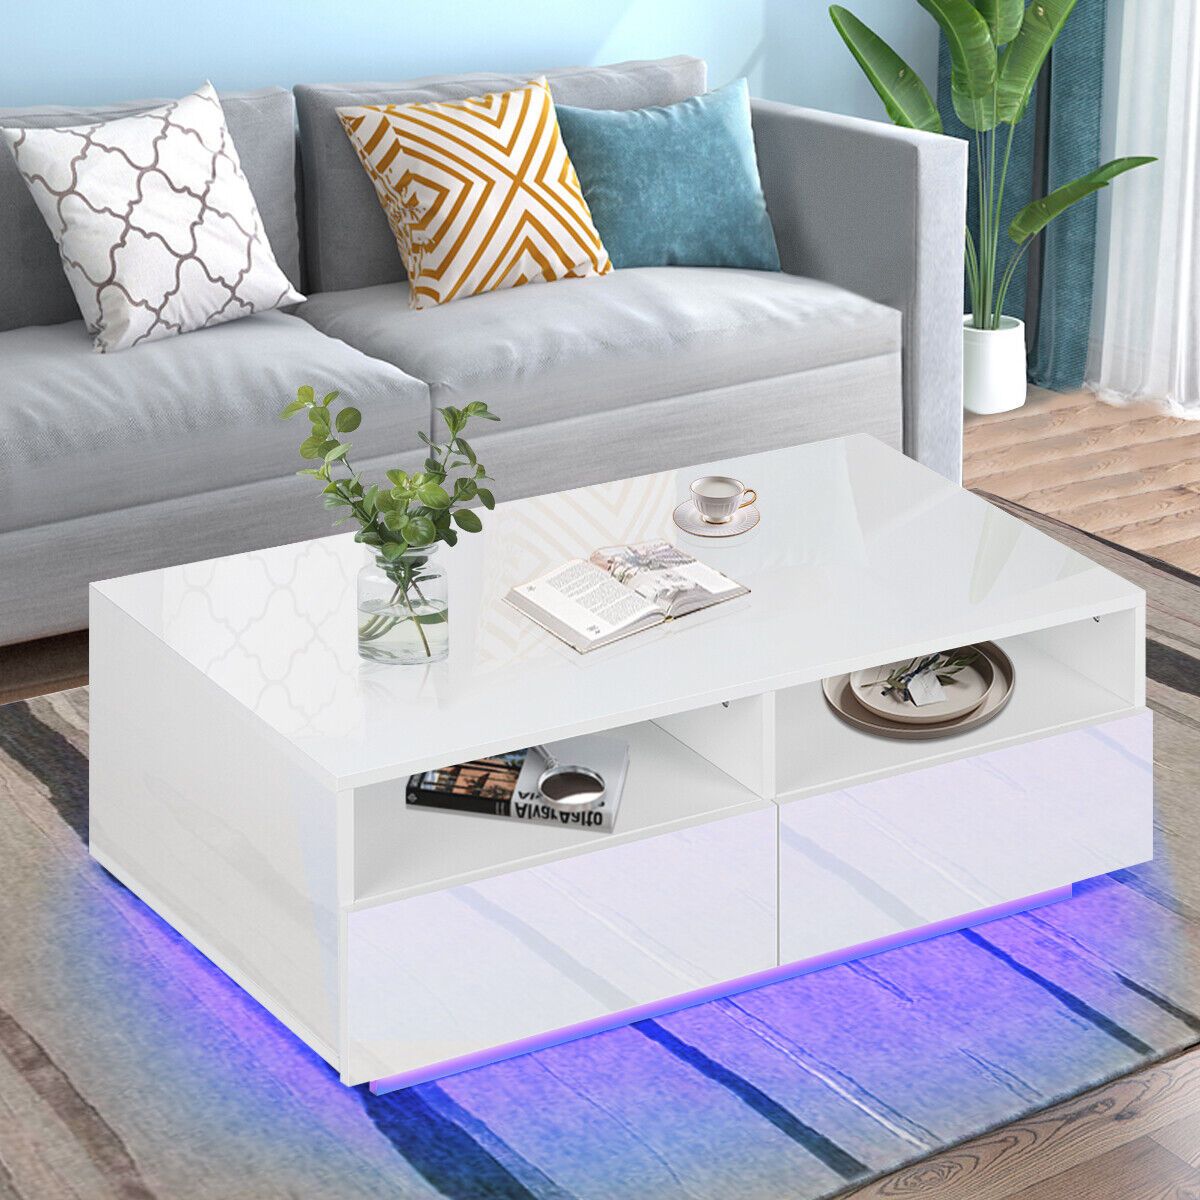 Modern Led High Gloss Coffee Table 4 Drawers Living Room End Table With |  Ebay Intended For Led Coffee Tables With 4 Drawers (View 7 of 15)